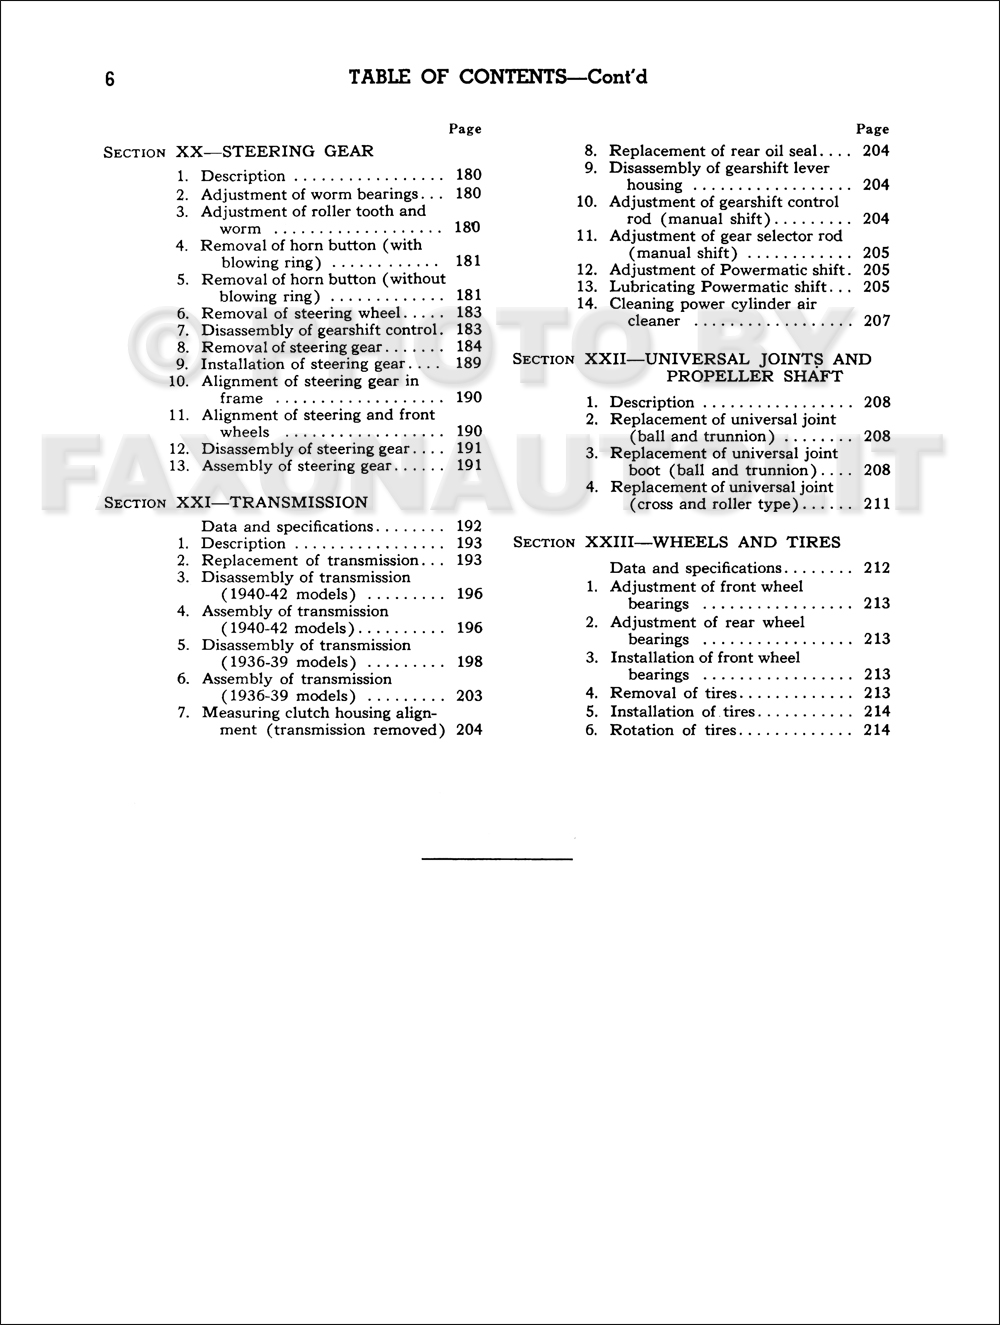 Table of Contents Page 5